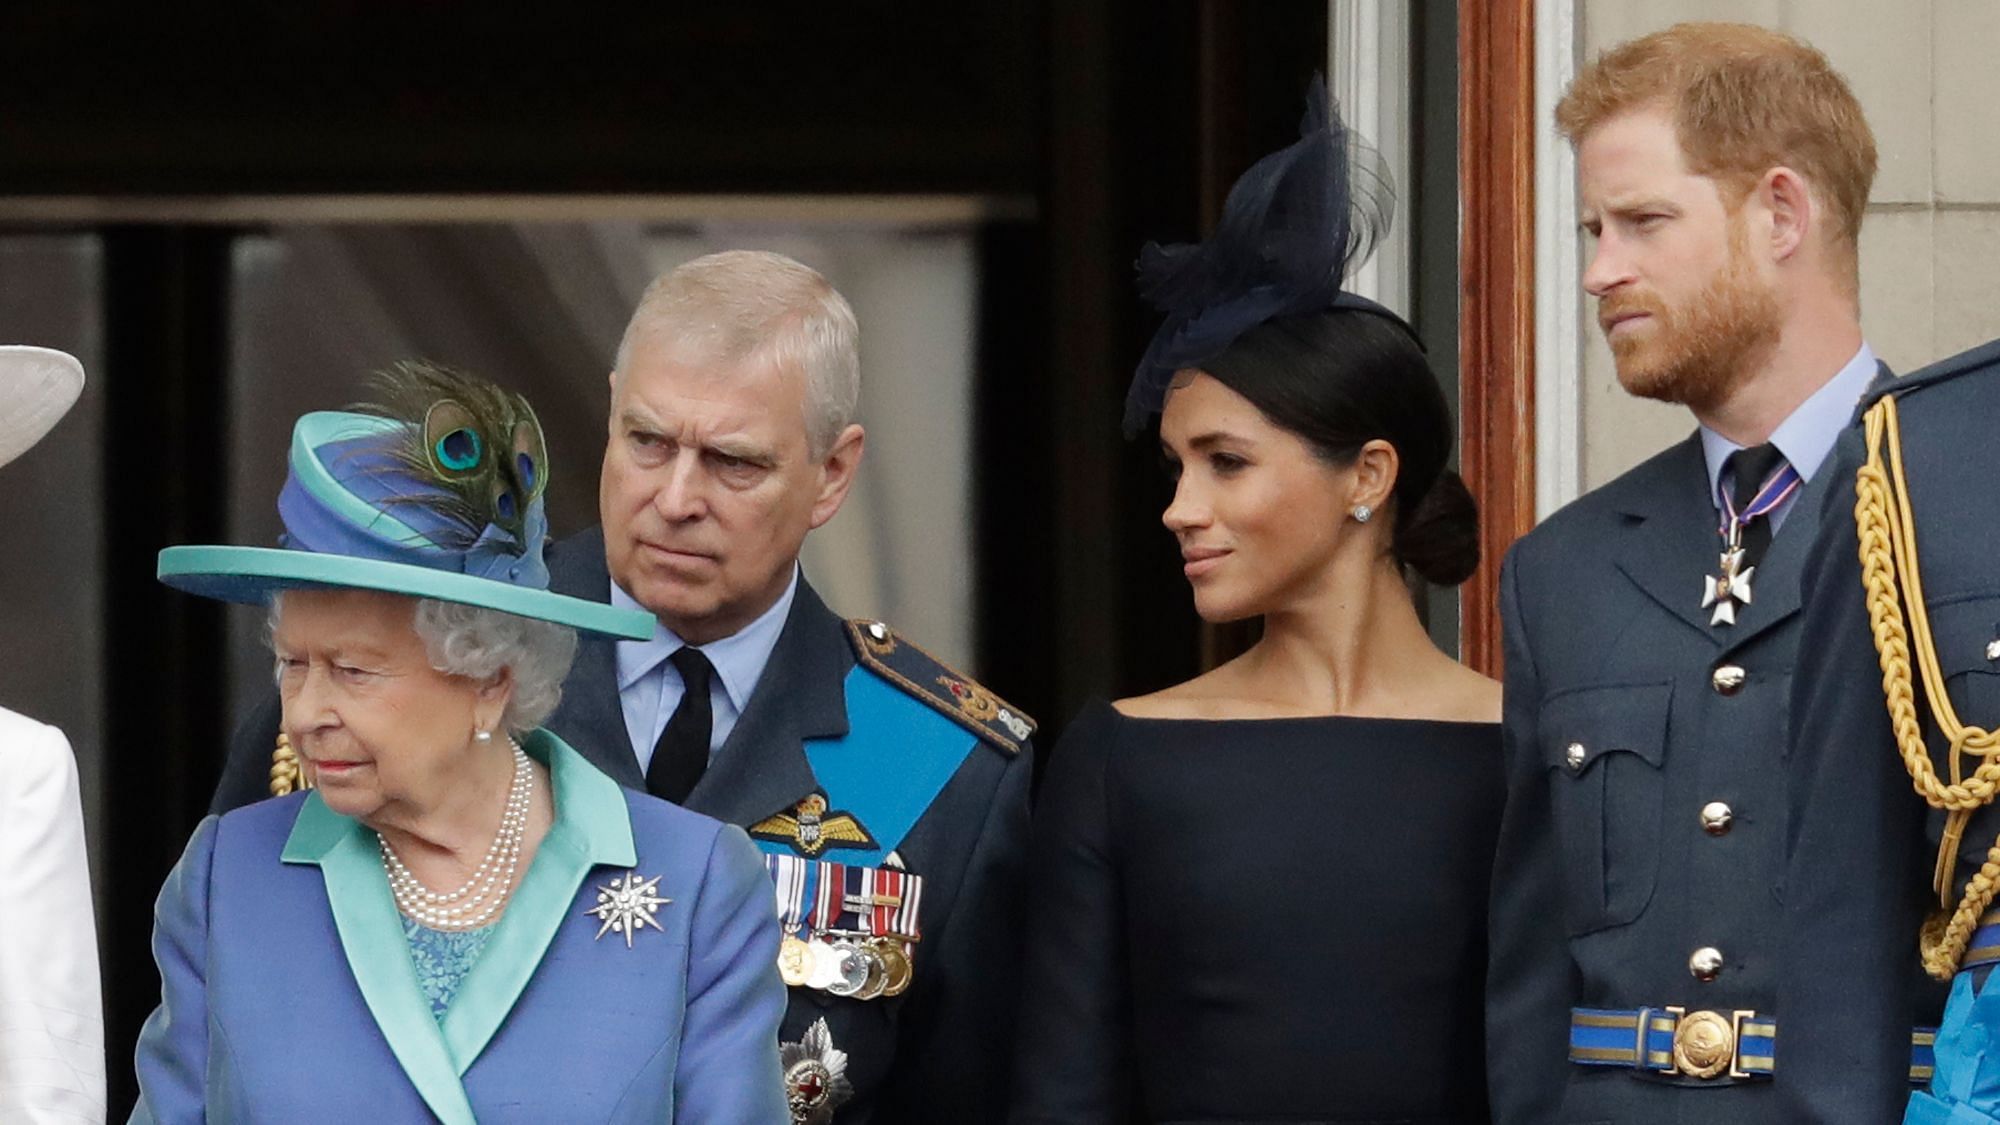 File photo of Queen Elizabeth II, Prince Andrew, Meghan the Duchess of Sussex and Prince Harry.